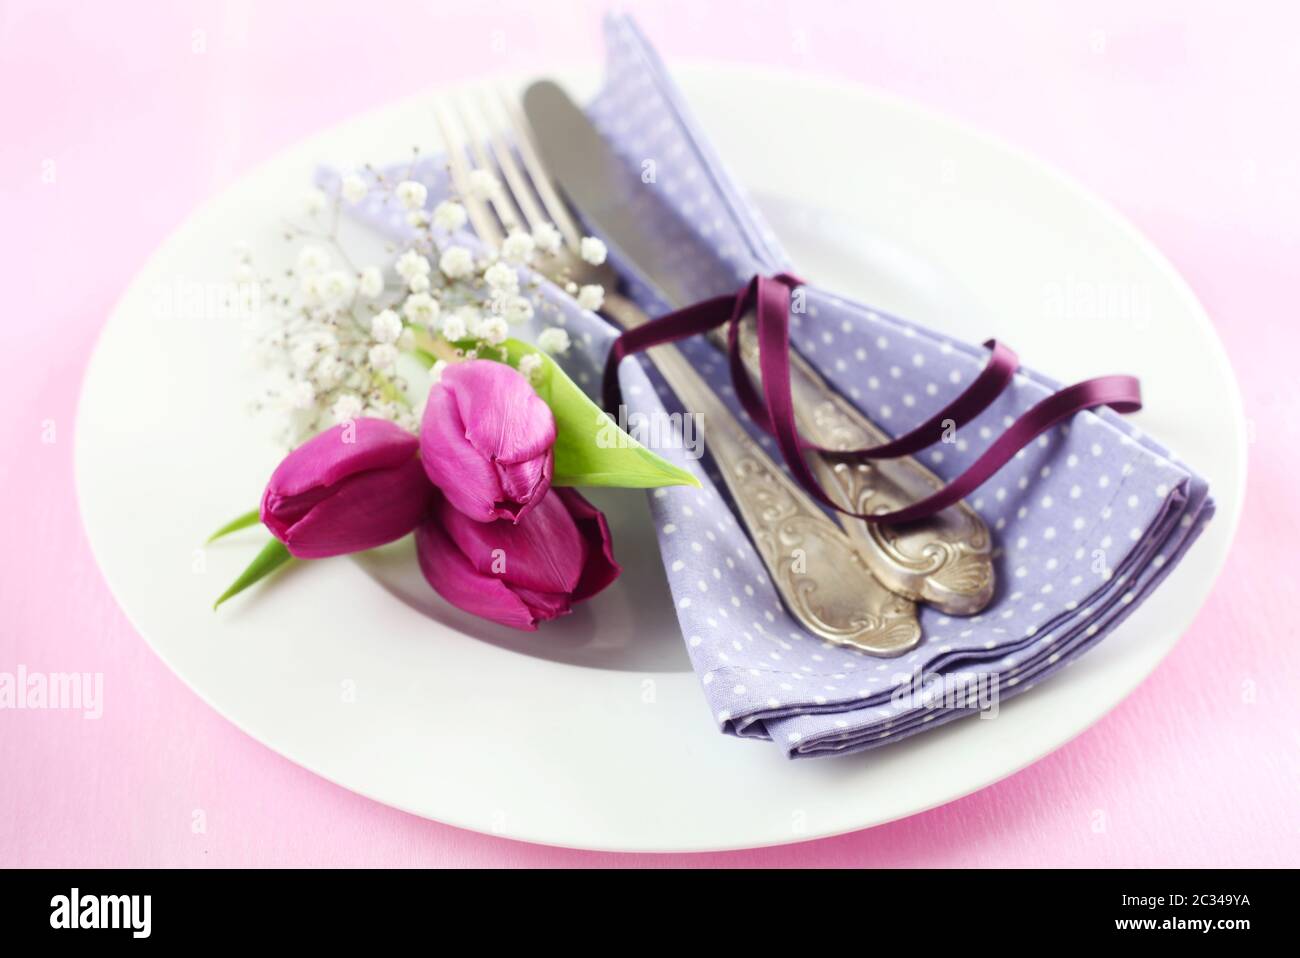 Place Setting With Tulips On A Pink Background Stock Photo